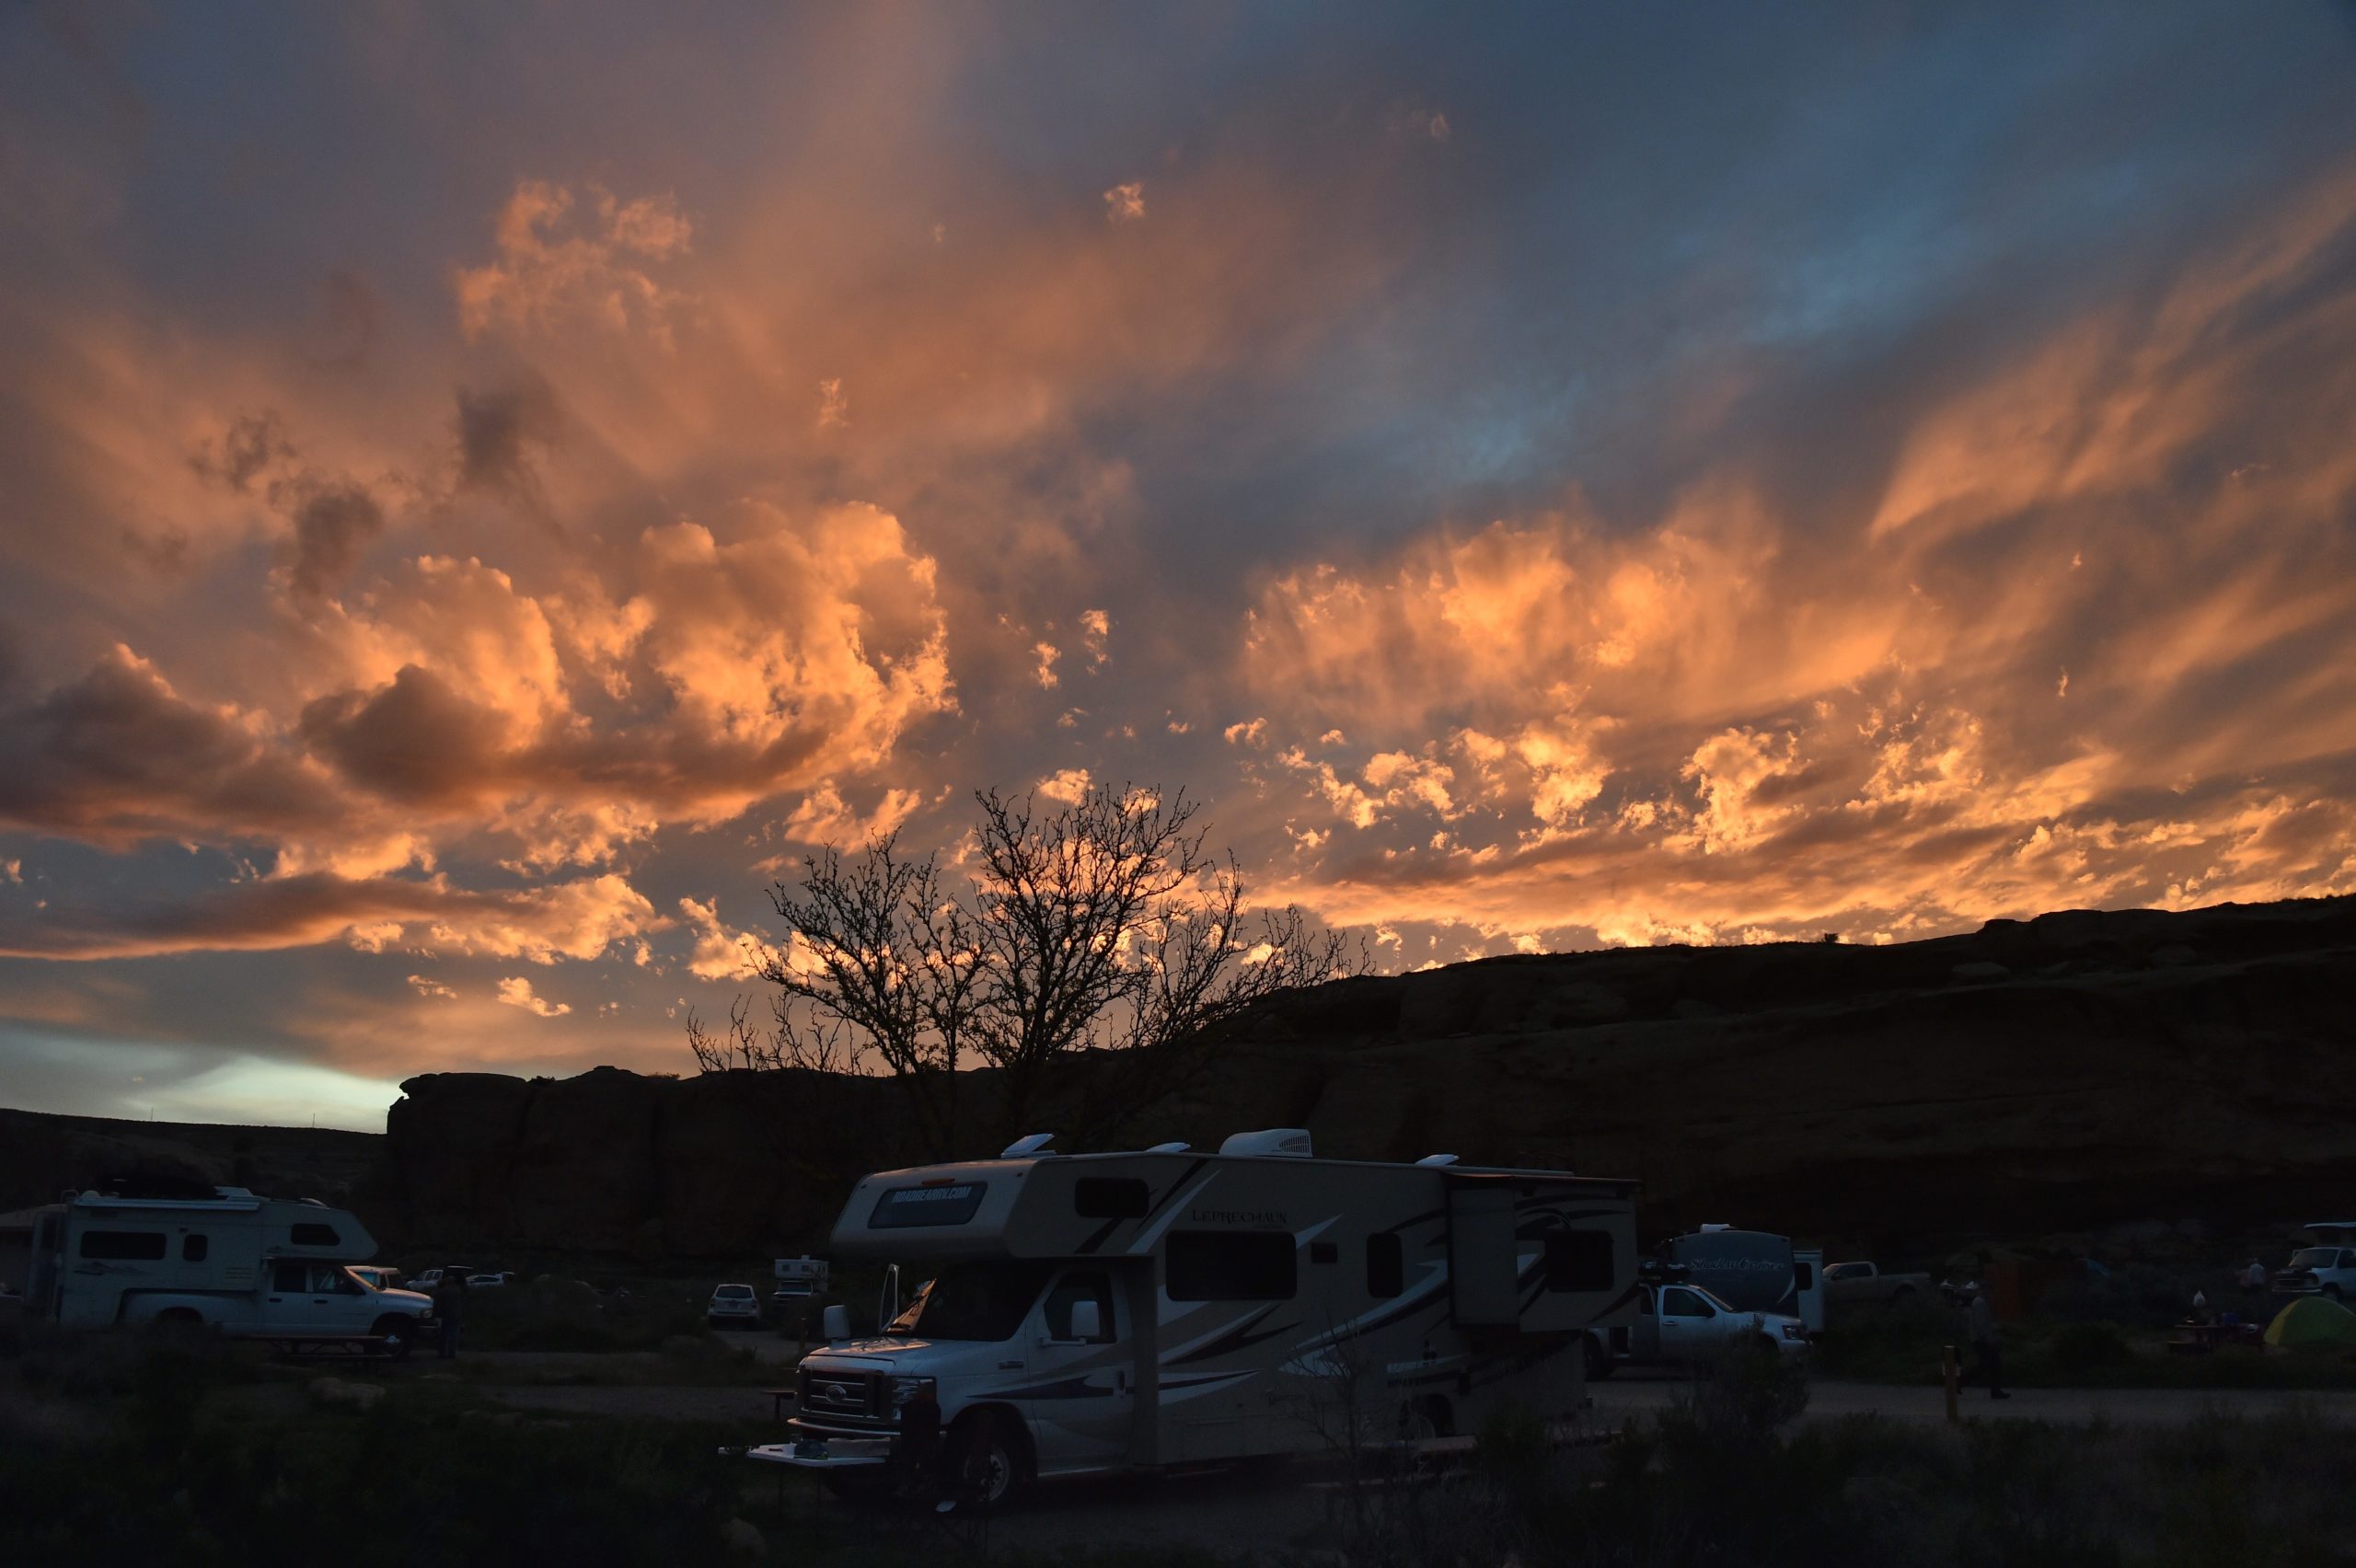 The sun sets over Gallo campground at Chaco Culture National Historical Park on May 20, 2015. (MLADEN ANTONOV/AFP via Getty Images)